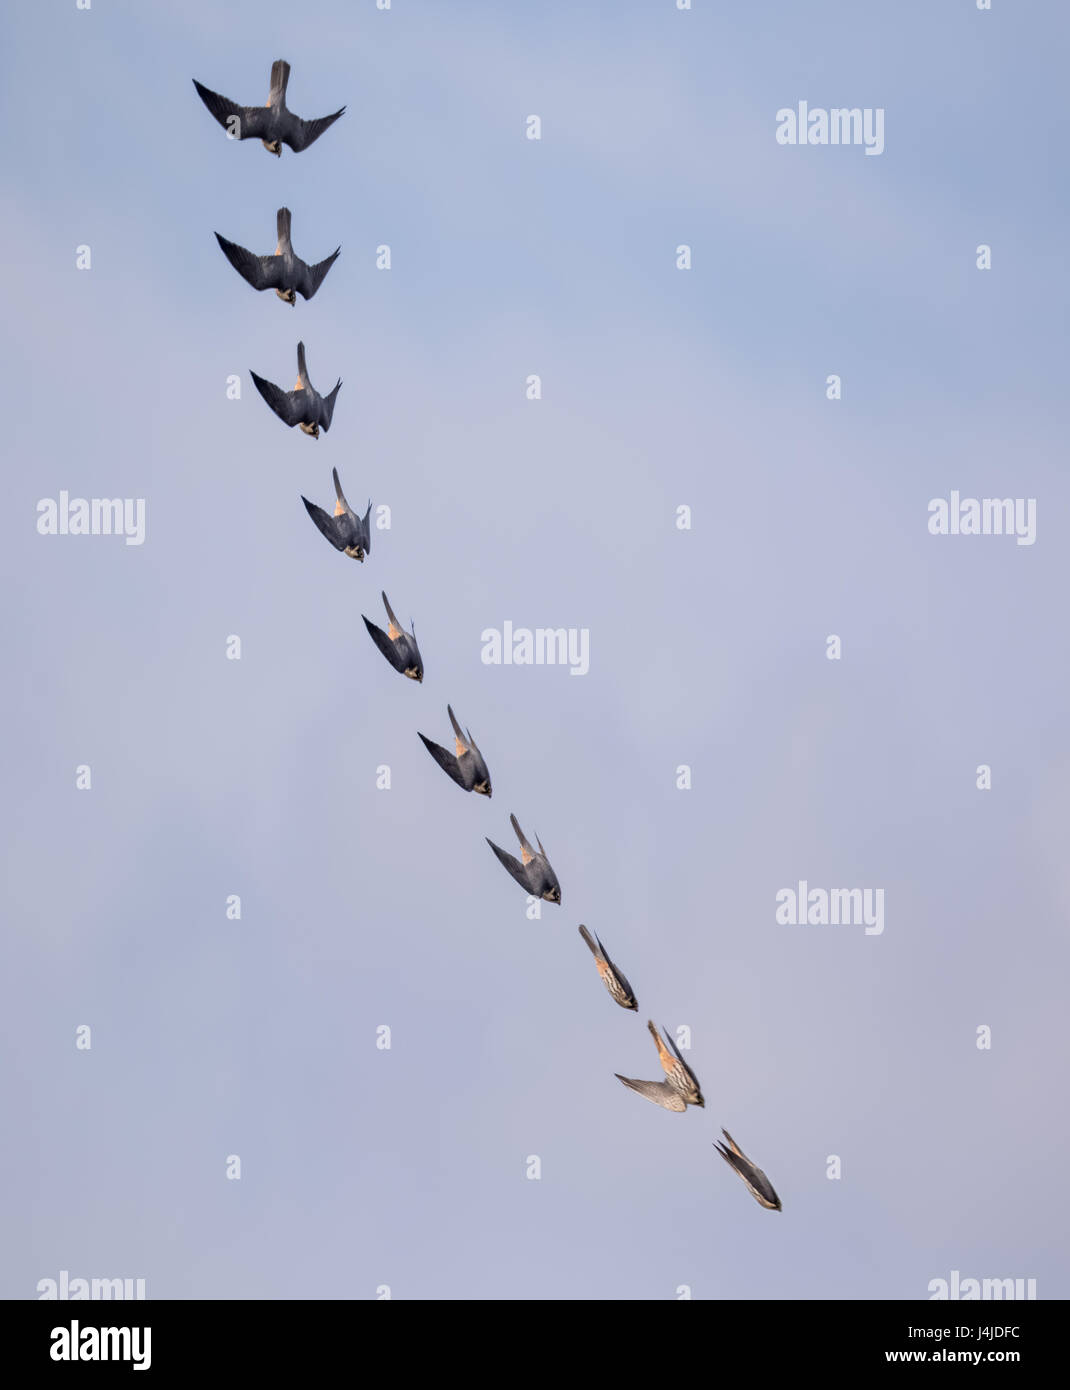 Eurasian Hobby falcon (Falco subbuteo) flying, in flight, stoop dive diving composite, showing 10 frames of the stoop Stock Photo